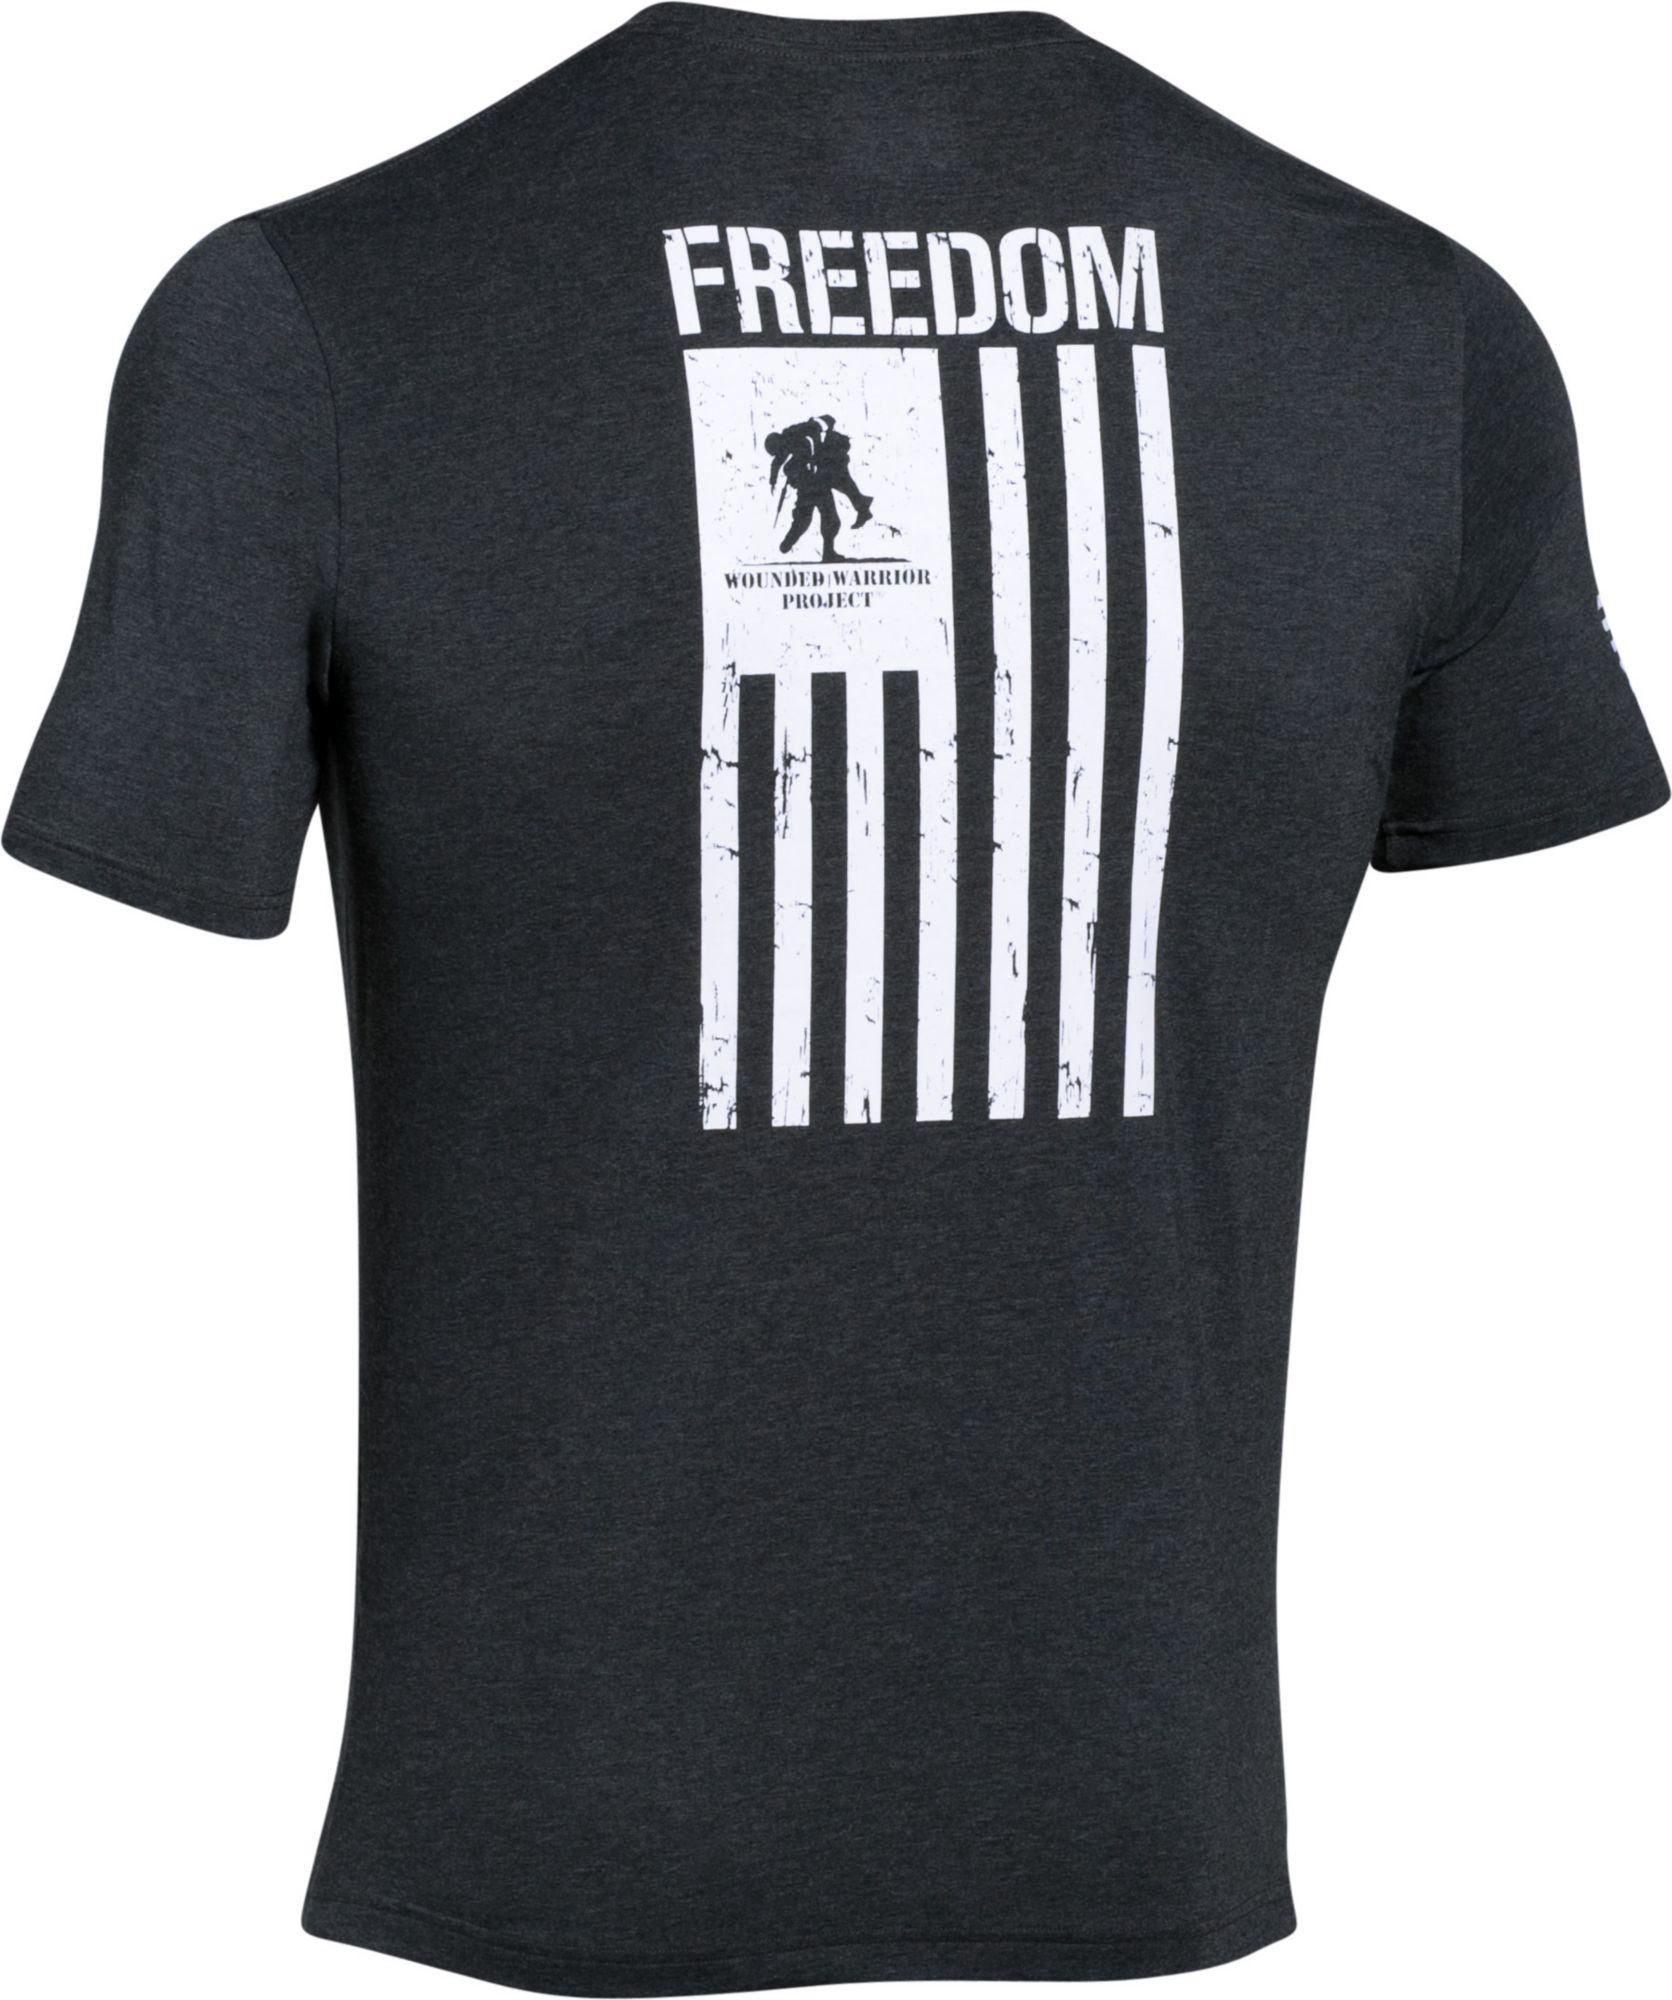 Under Armour Wounded Warrior Project Freedom Flag T-shirt in Black for ...